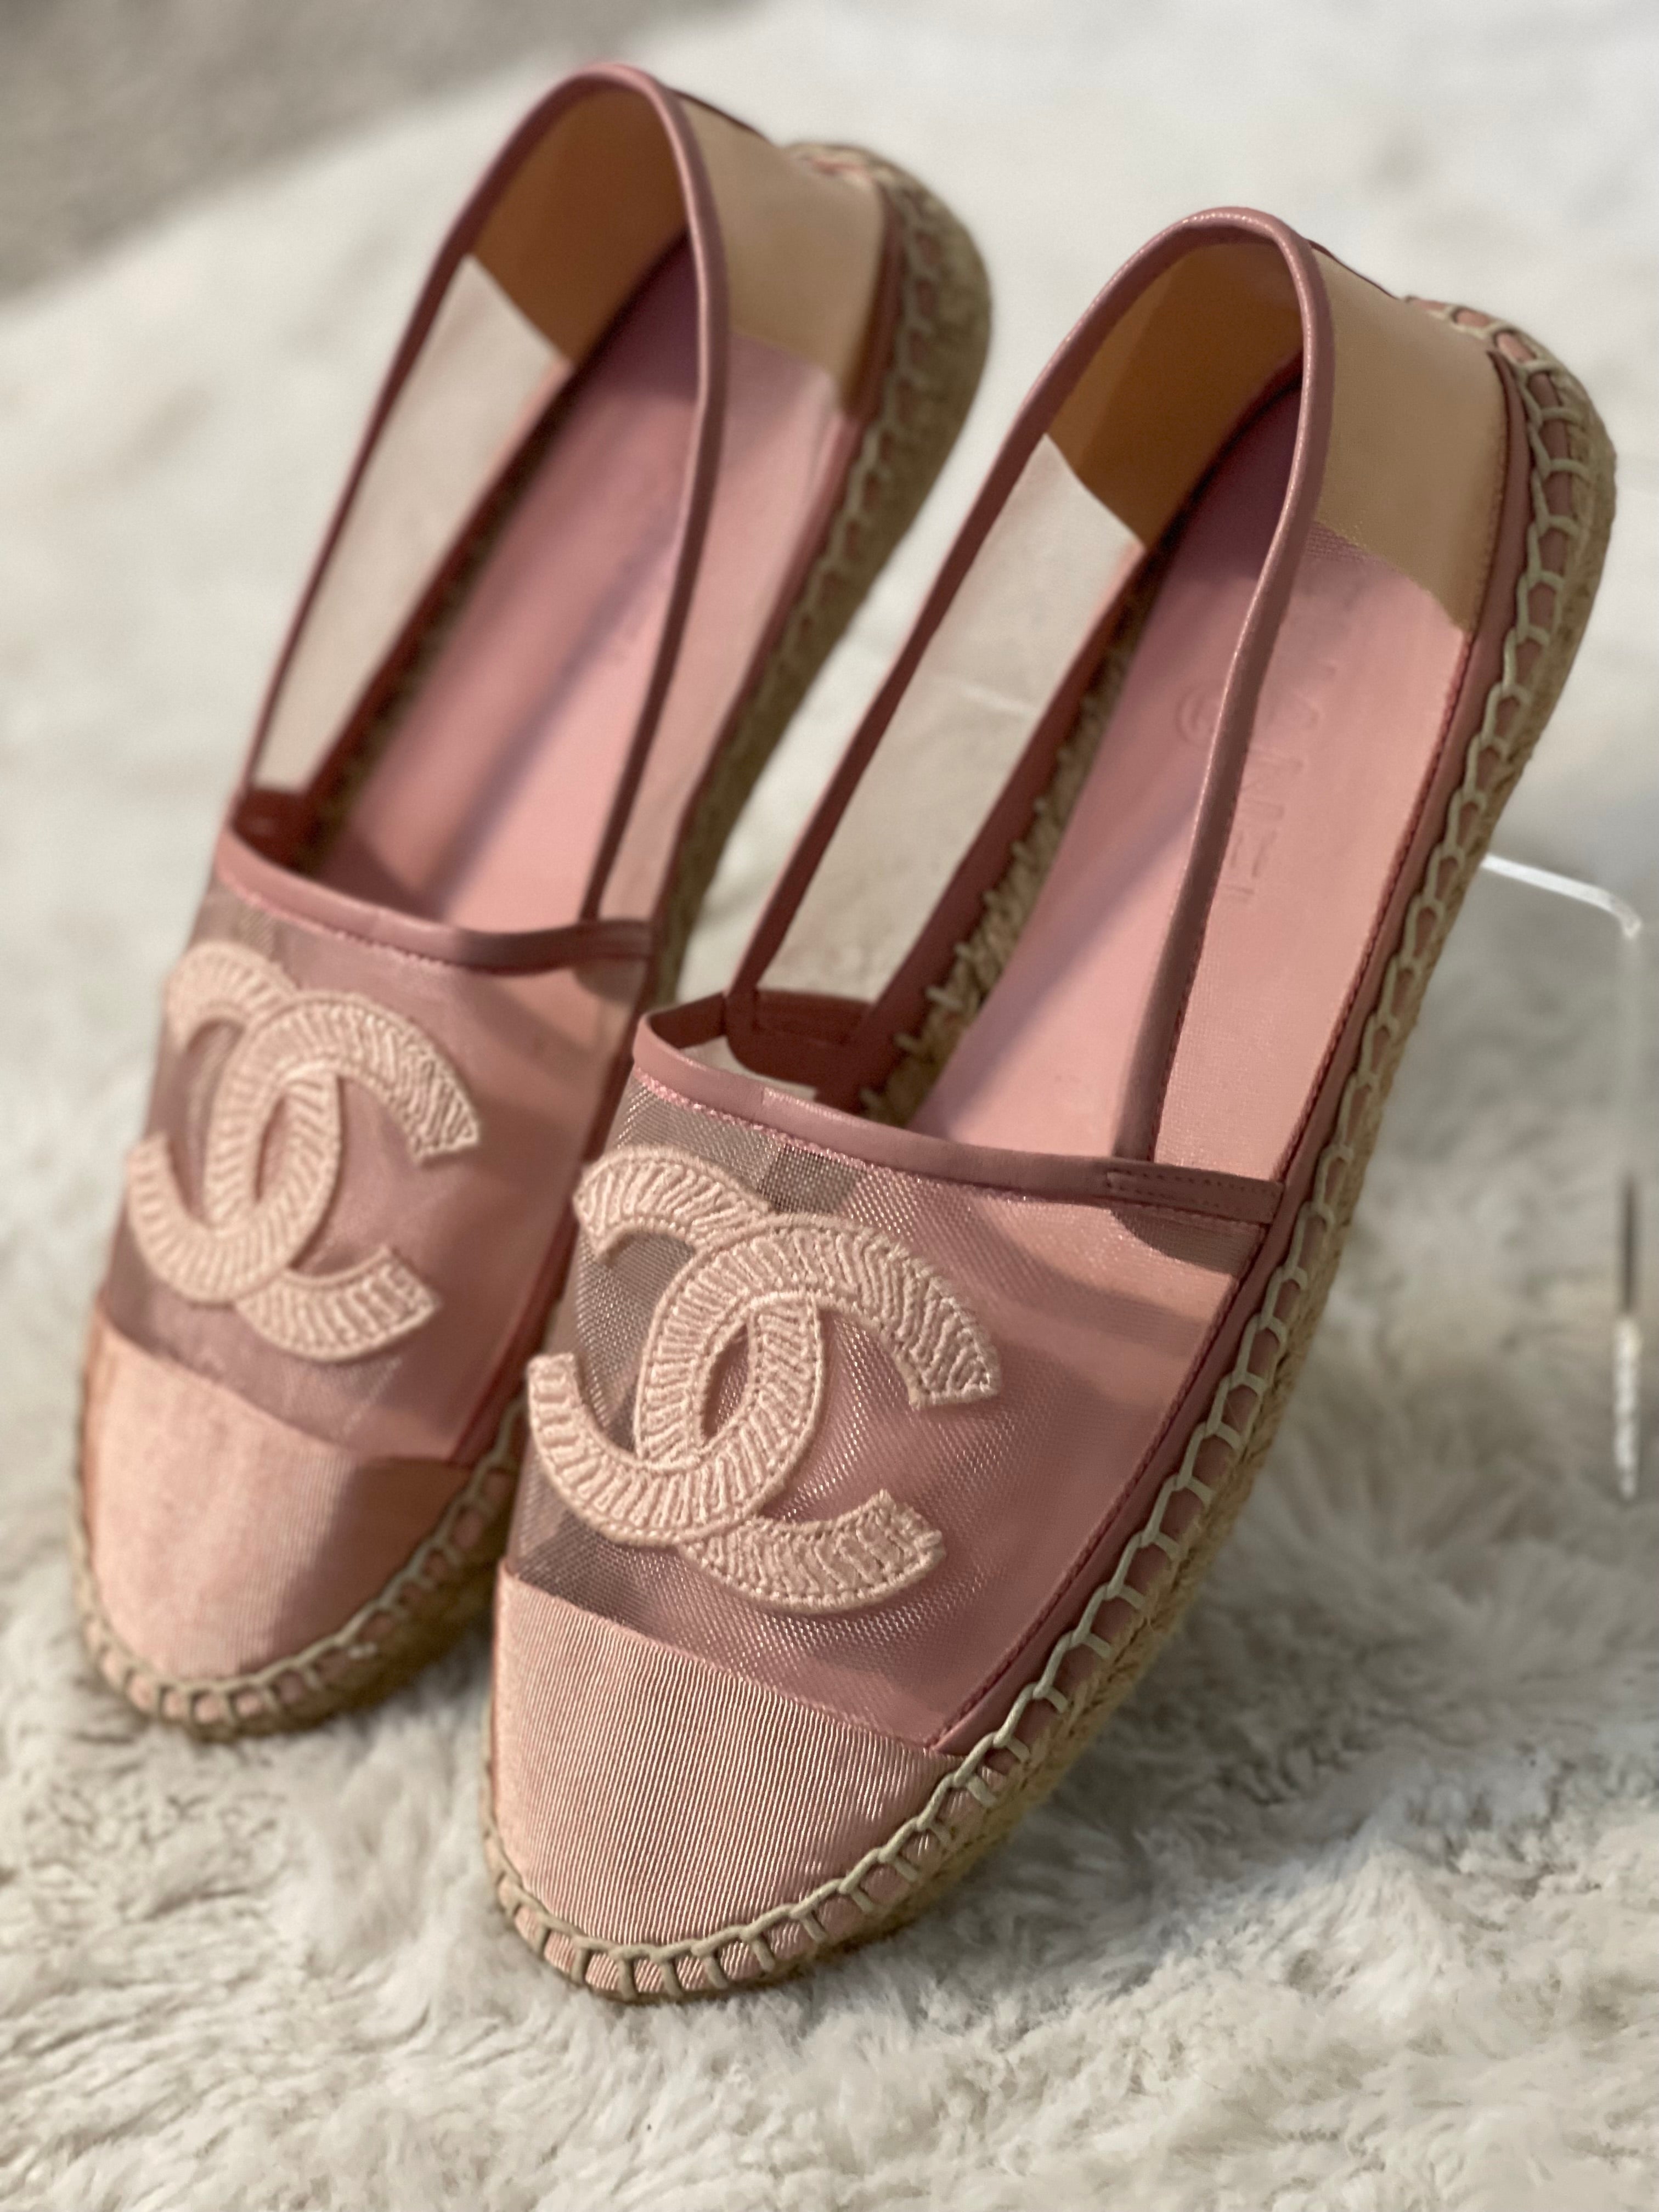 Espadrilles Chanel Pink size 38.5 EU in Suede - 32549806